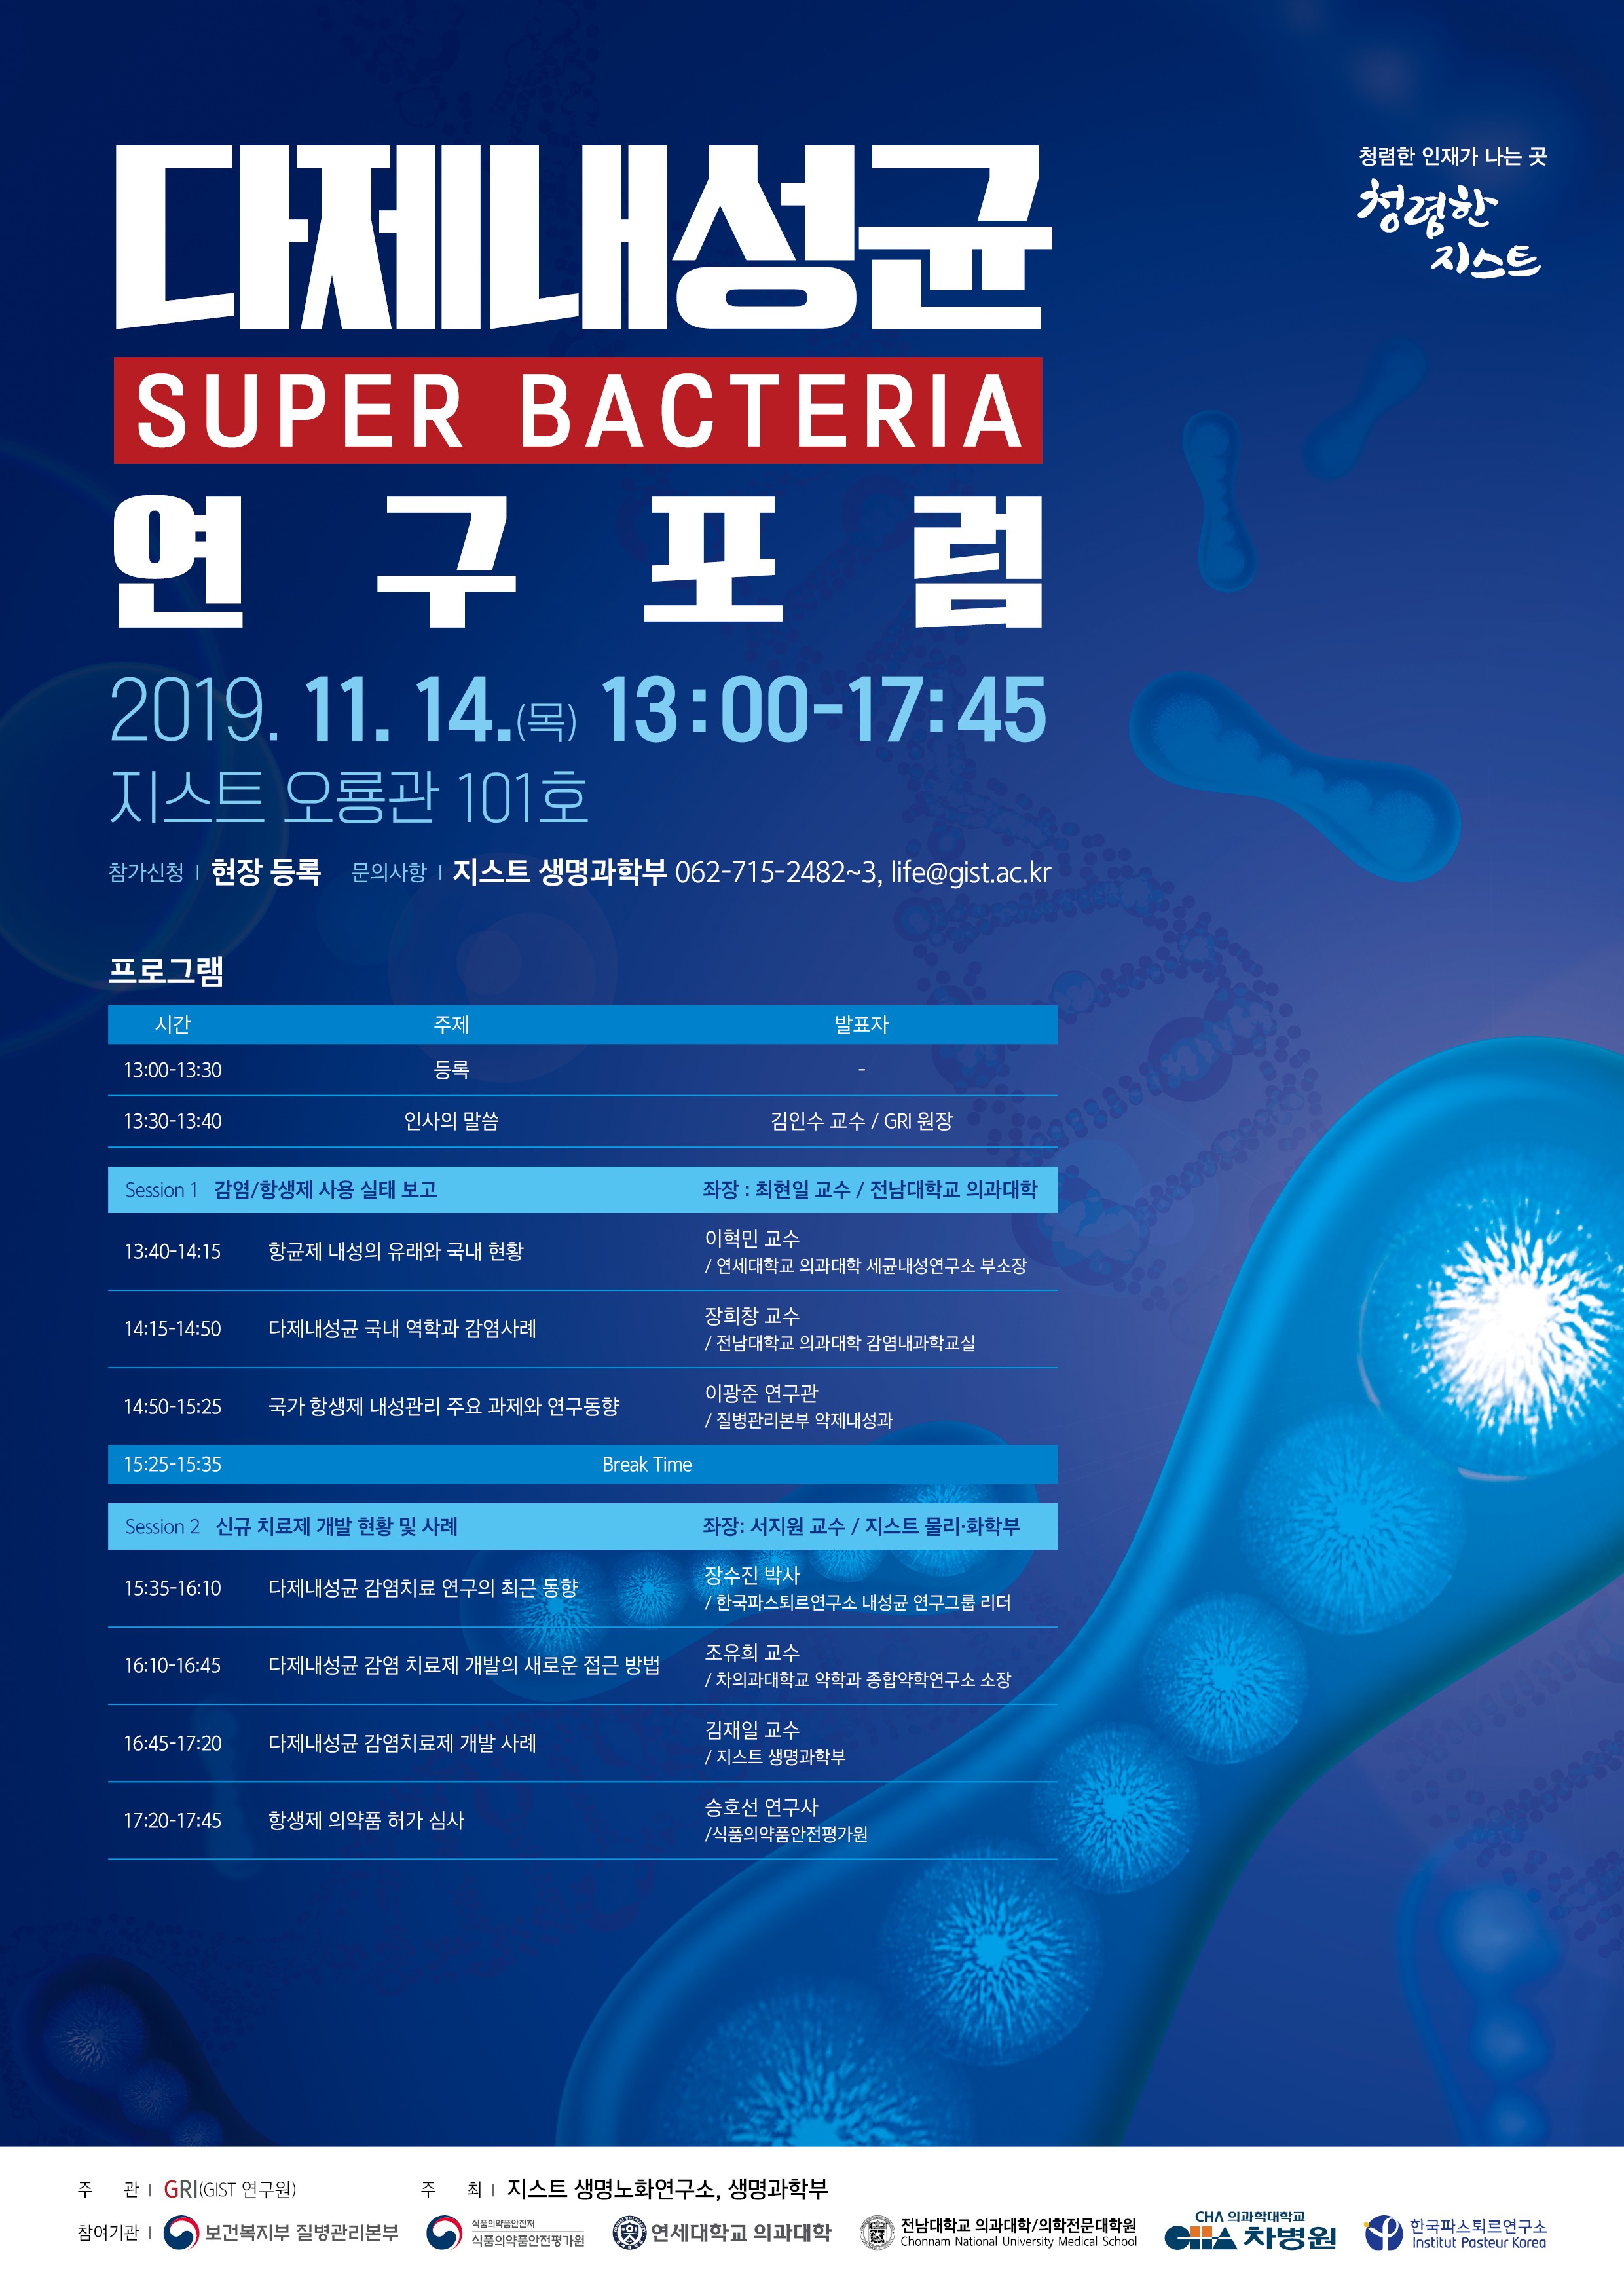 GIST School of Life Sciences and the Aging Research Institute hosts "Multidrug-Resistant Super Bacteria Research Forum" 이미지